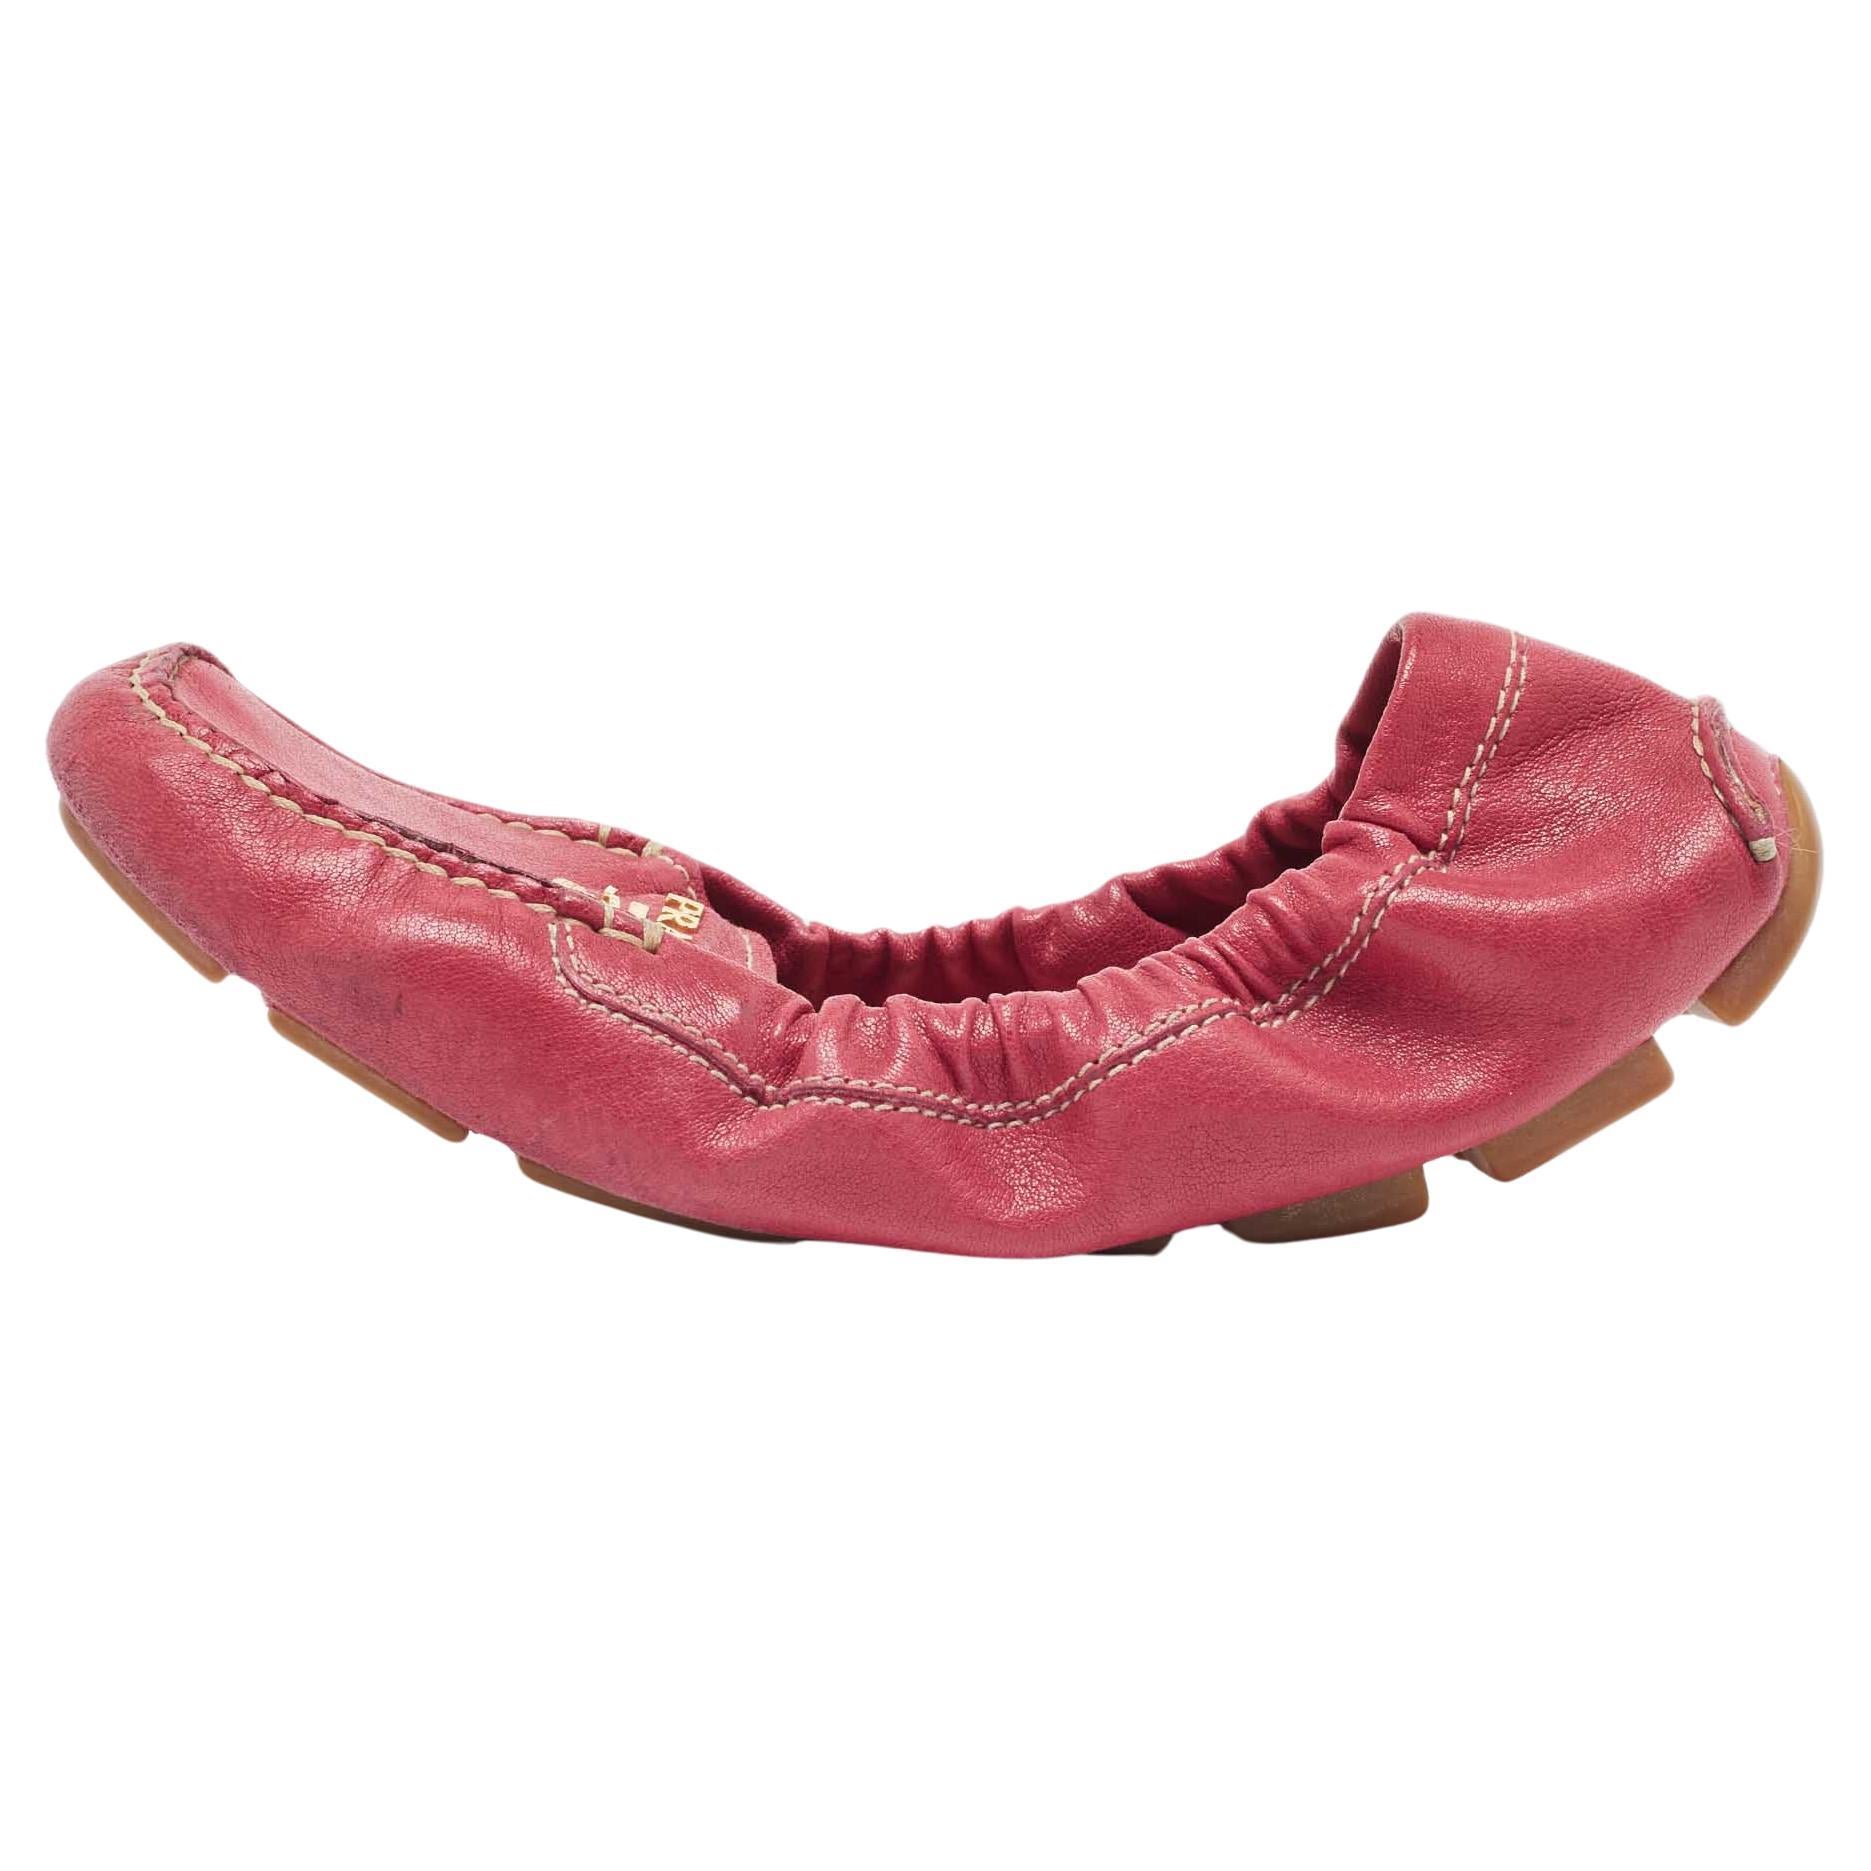 Prada Pink Leather Scrunch Slip On Loafers Size 36.5 For Sale